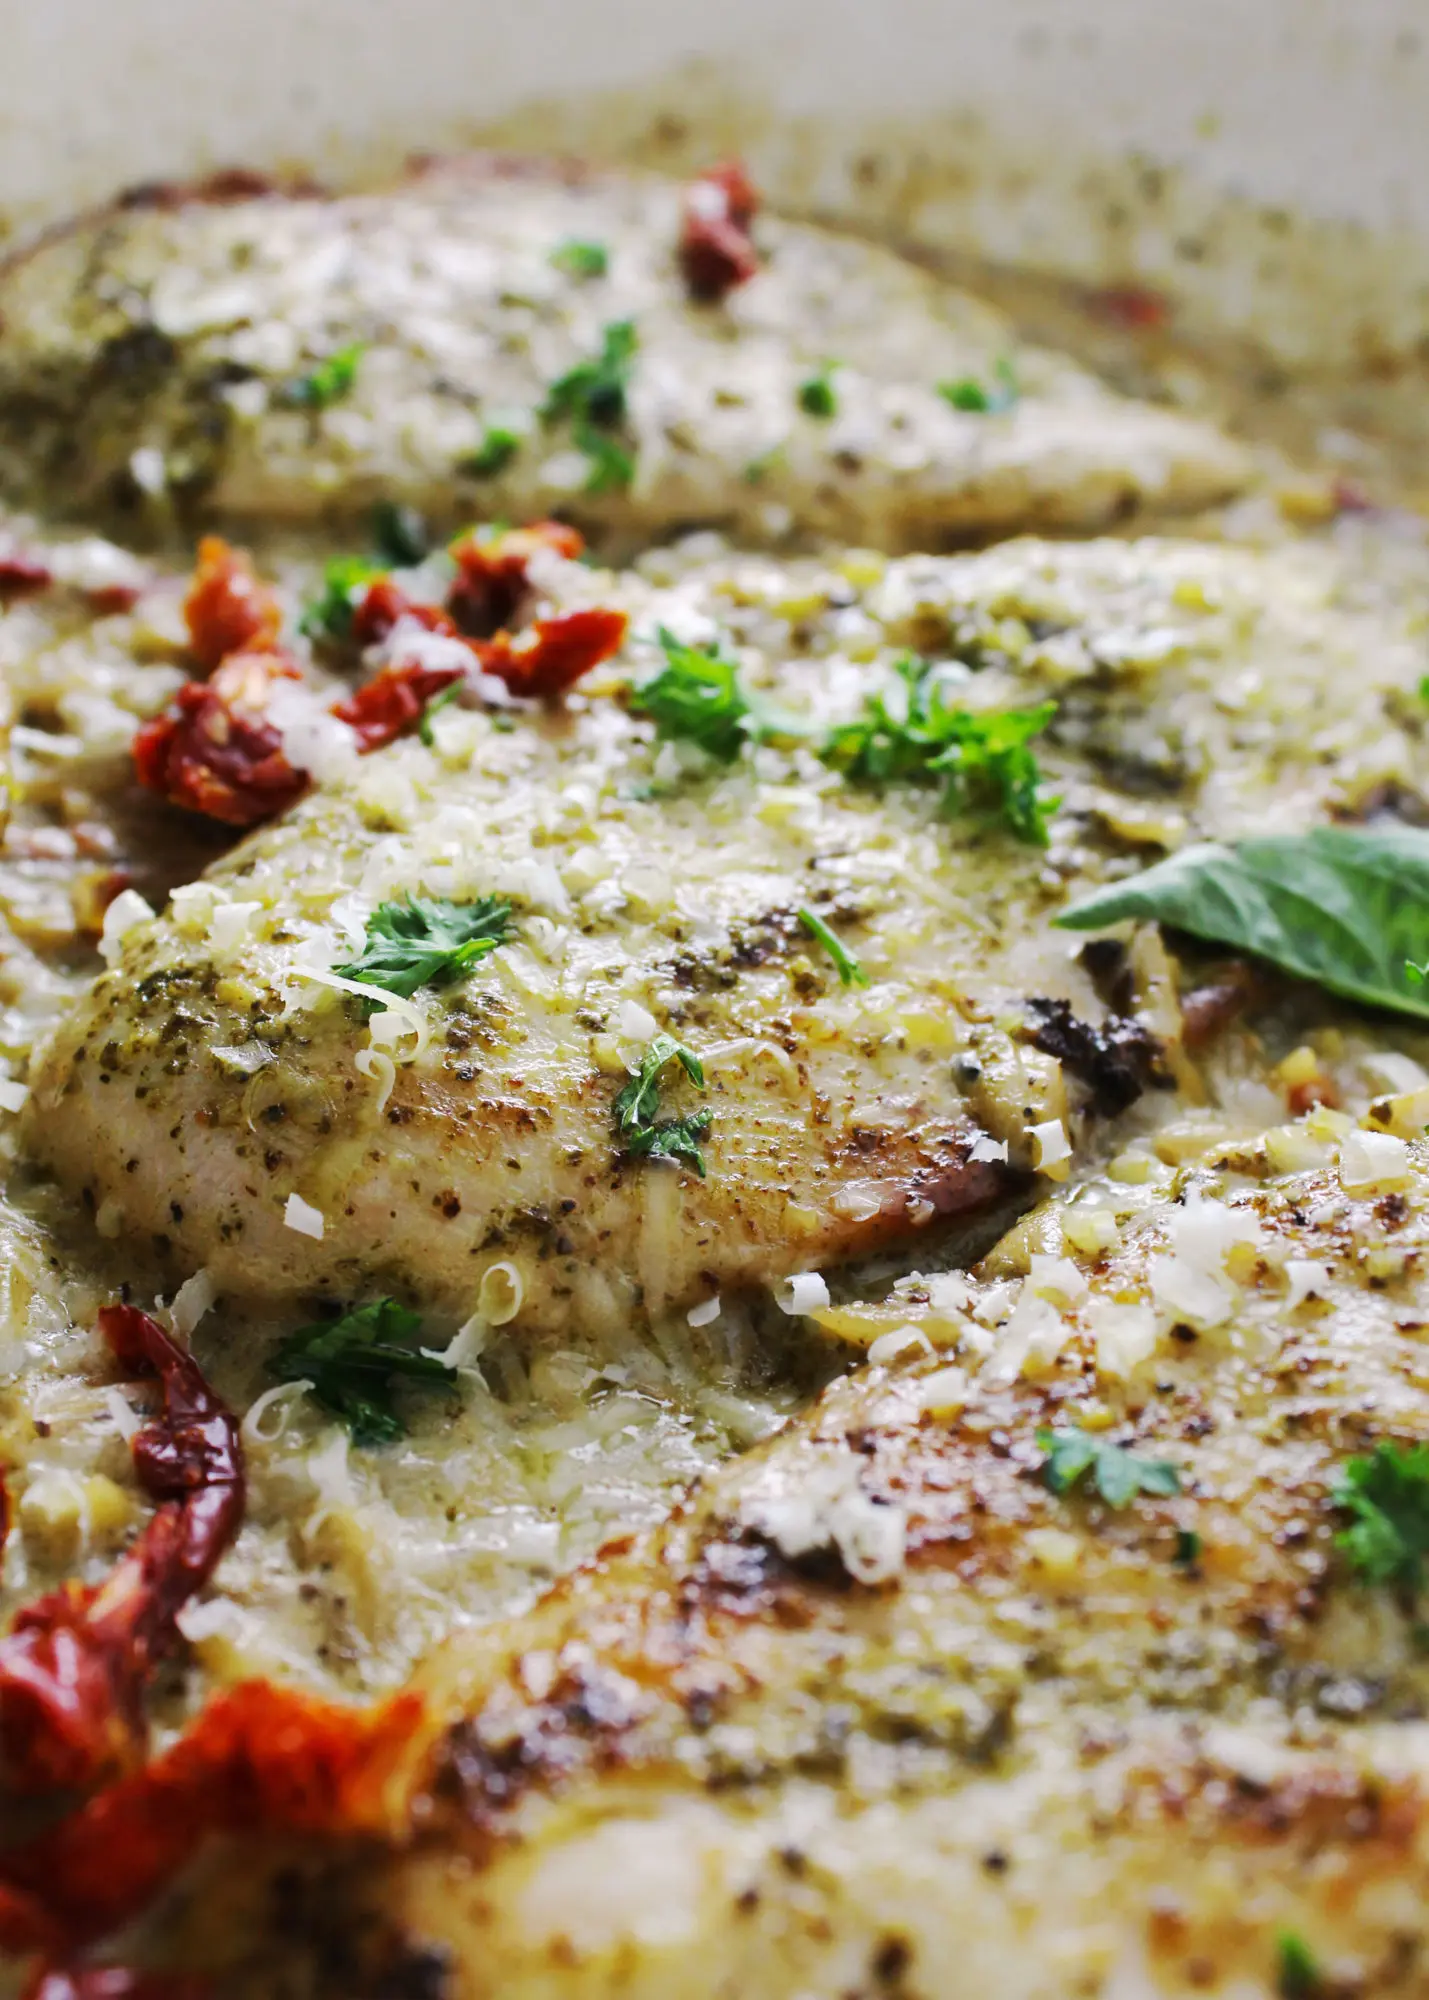 Pesto chicken in a creamy sauce with sun-dried tomatoes.